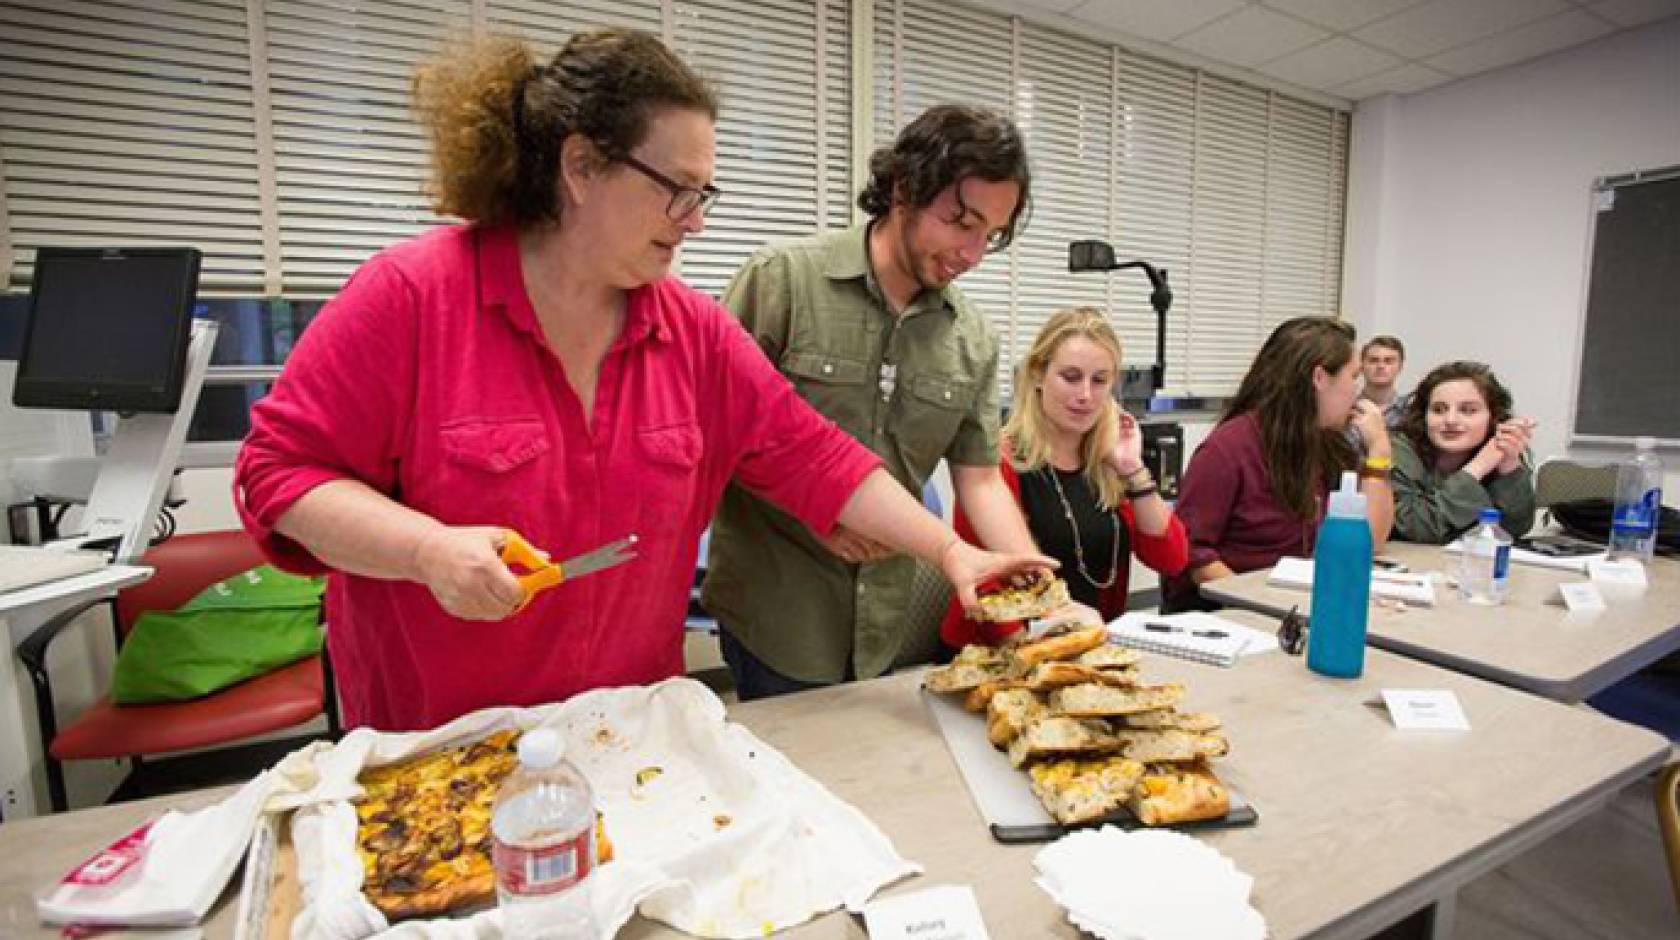 Evan Kleiman's students take a break from serious discussions about food issues to enjoy a focaccia pizza she made. Sharing food and recipes is an essential part of the course.